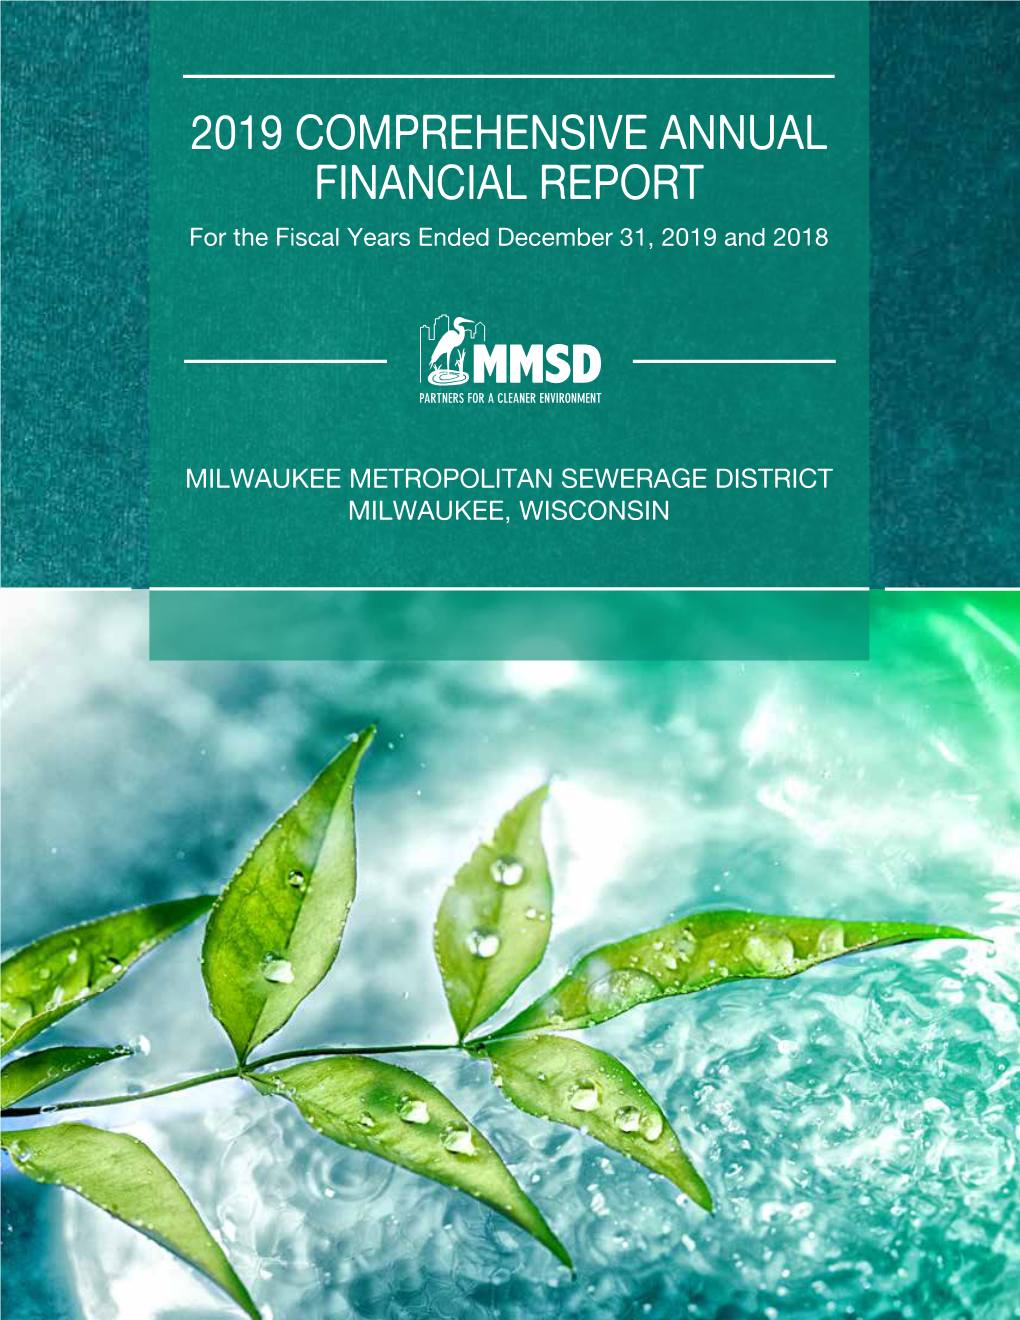 2019 COMPREHENSIVE ANNUAL FINANCIAL REPORT for the Fiscal Years Ended December 31, 2019 and 2018